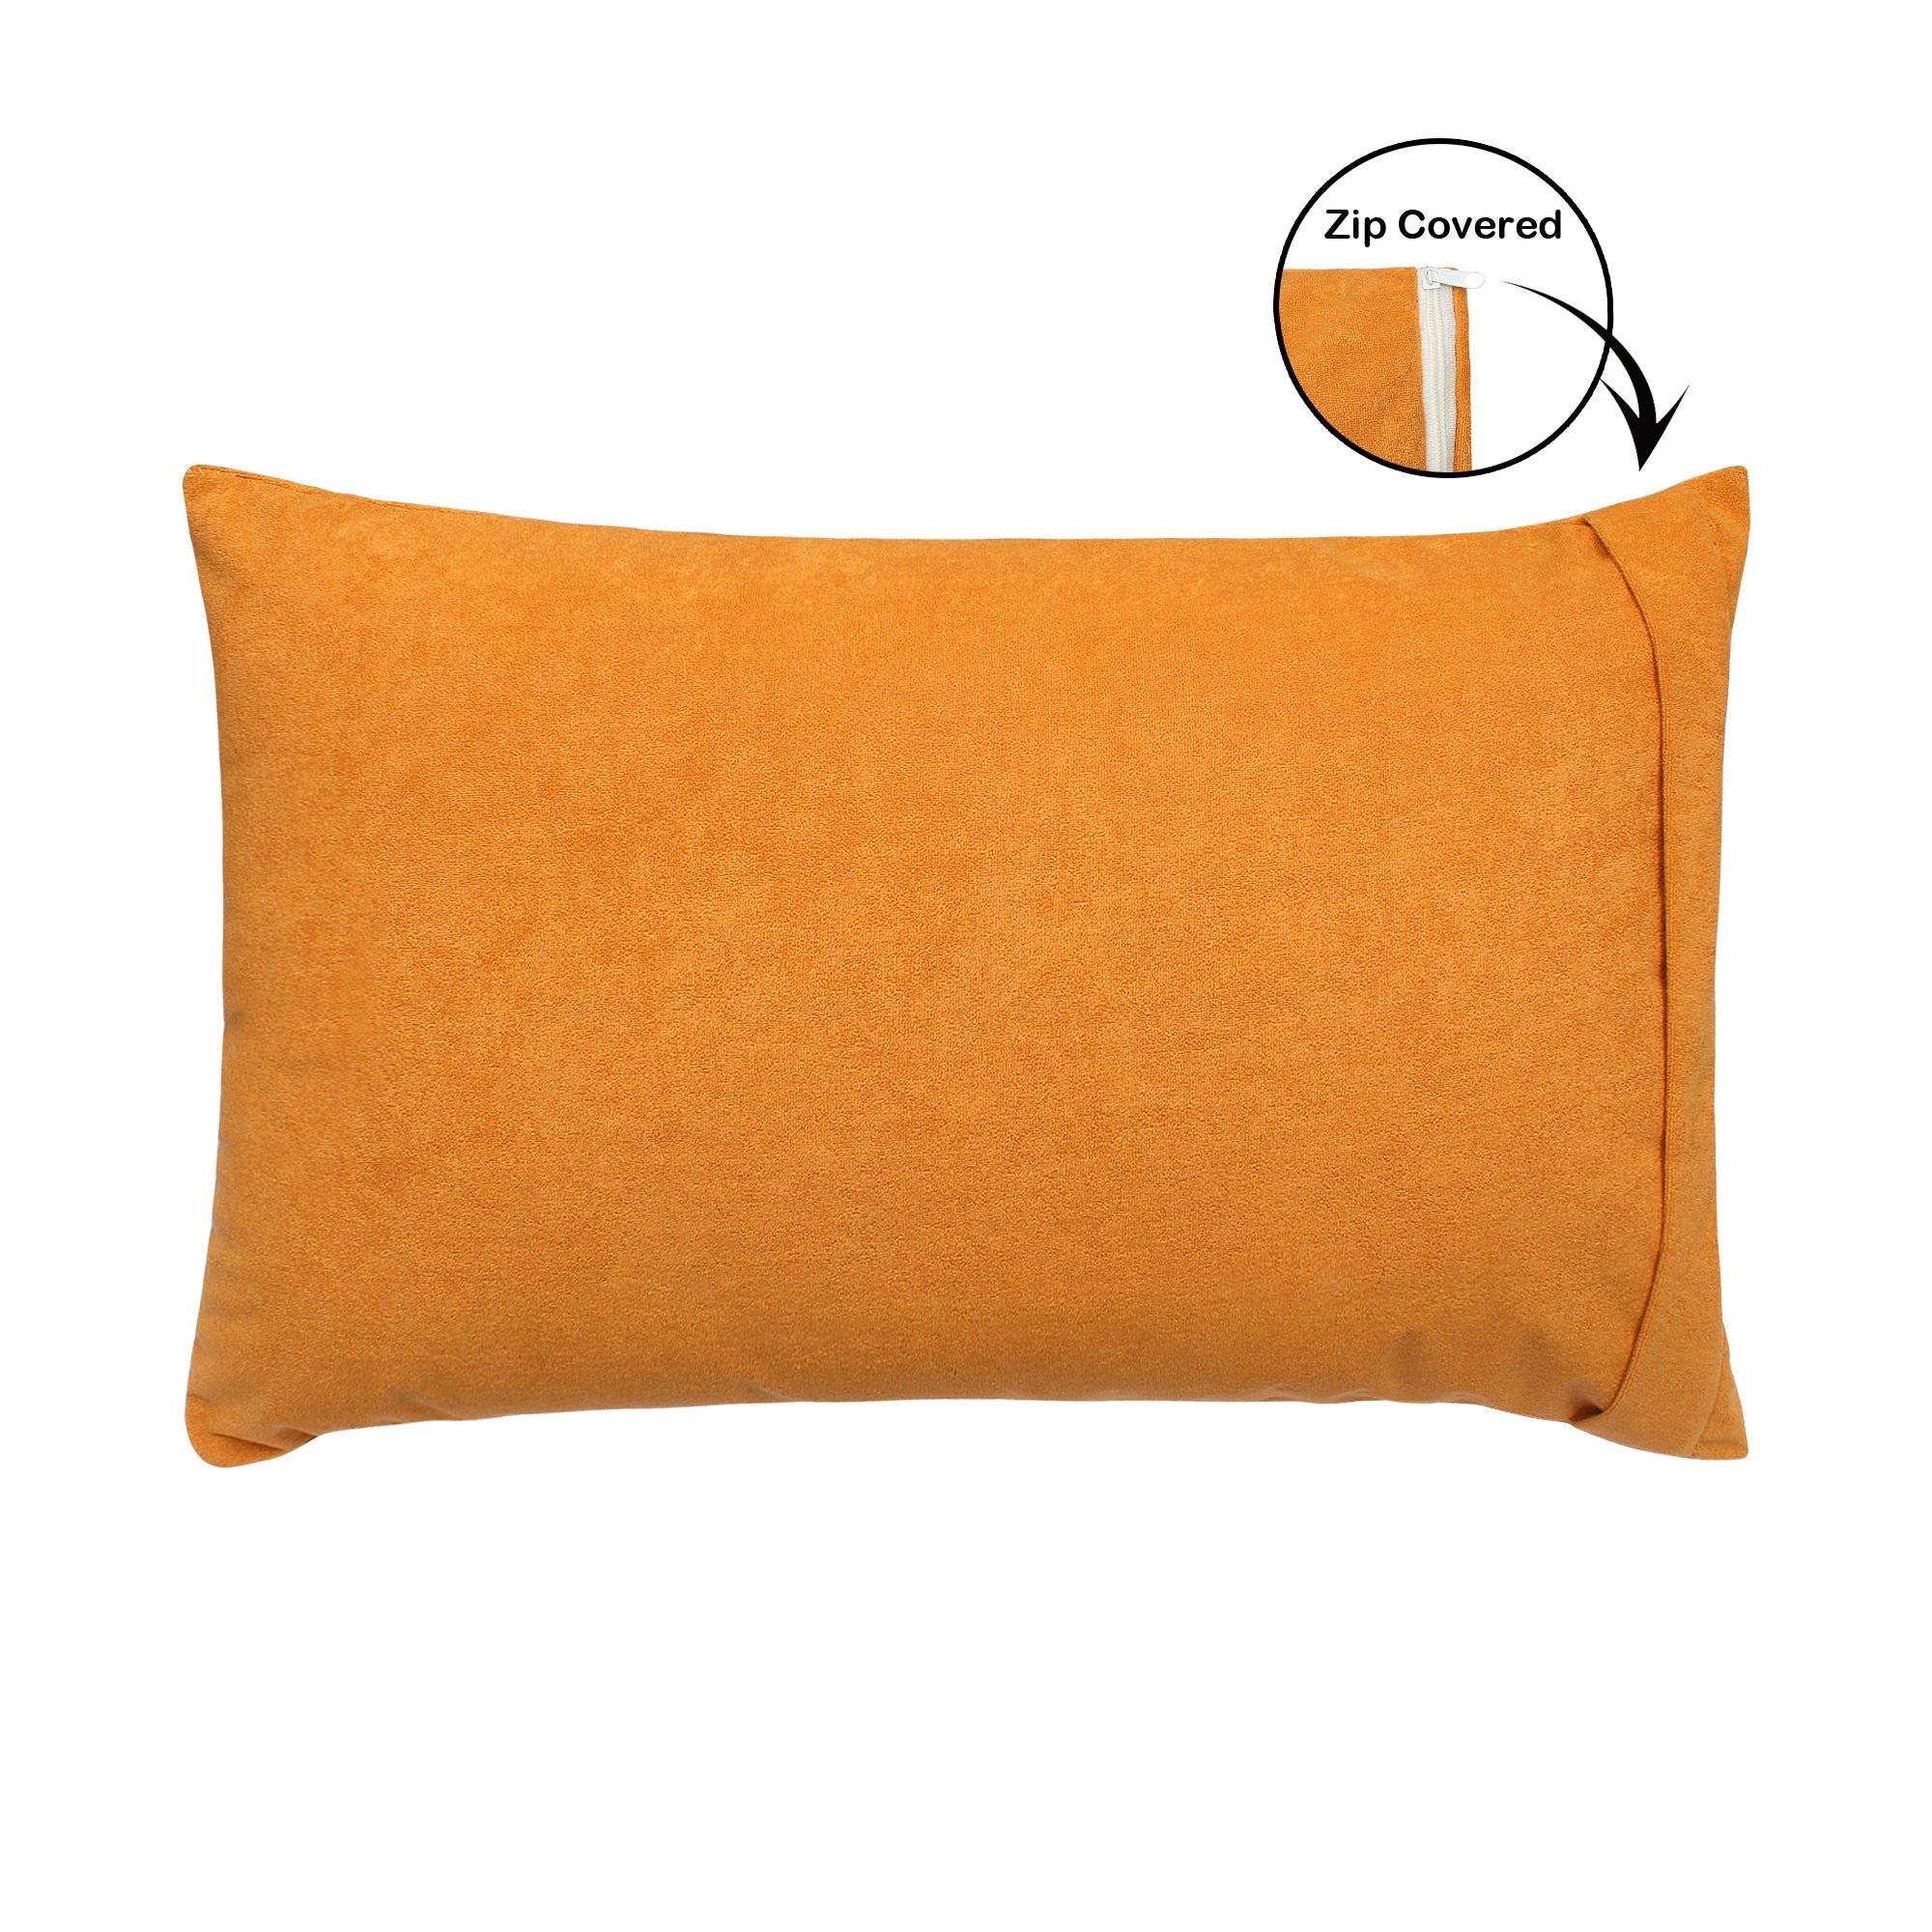 Waterproof Pillow Protector, Set Of 2 Pcs (GOLDEN) - Dream Care Furnishings Private Limited